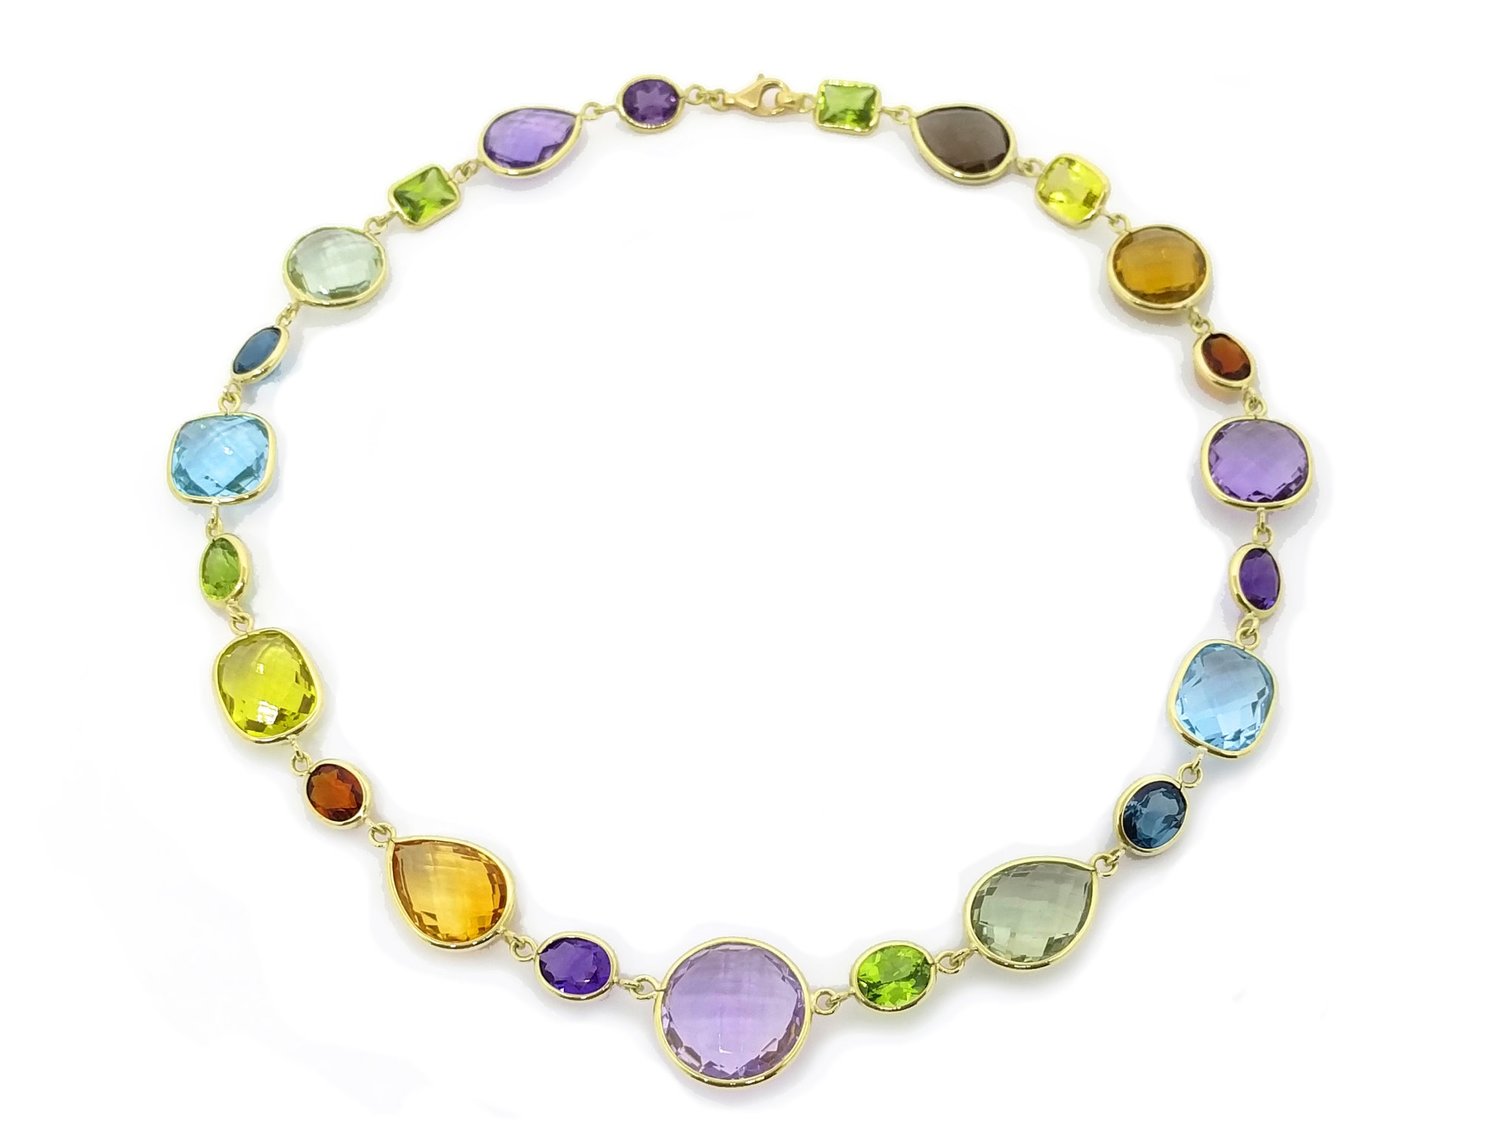 Glastonbury Jewelers - CT's Top-rated Jewelry Store for Diamond Engagement  Rings, Earrings, and Gemstone Jewelry | What's New | Multi-Colored Gemstone  Necklace in 18K Yellow Gold